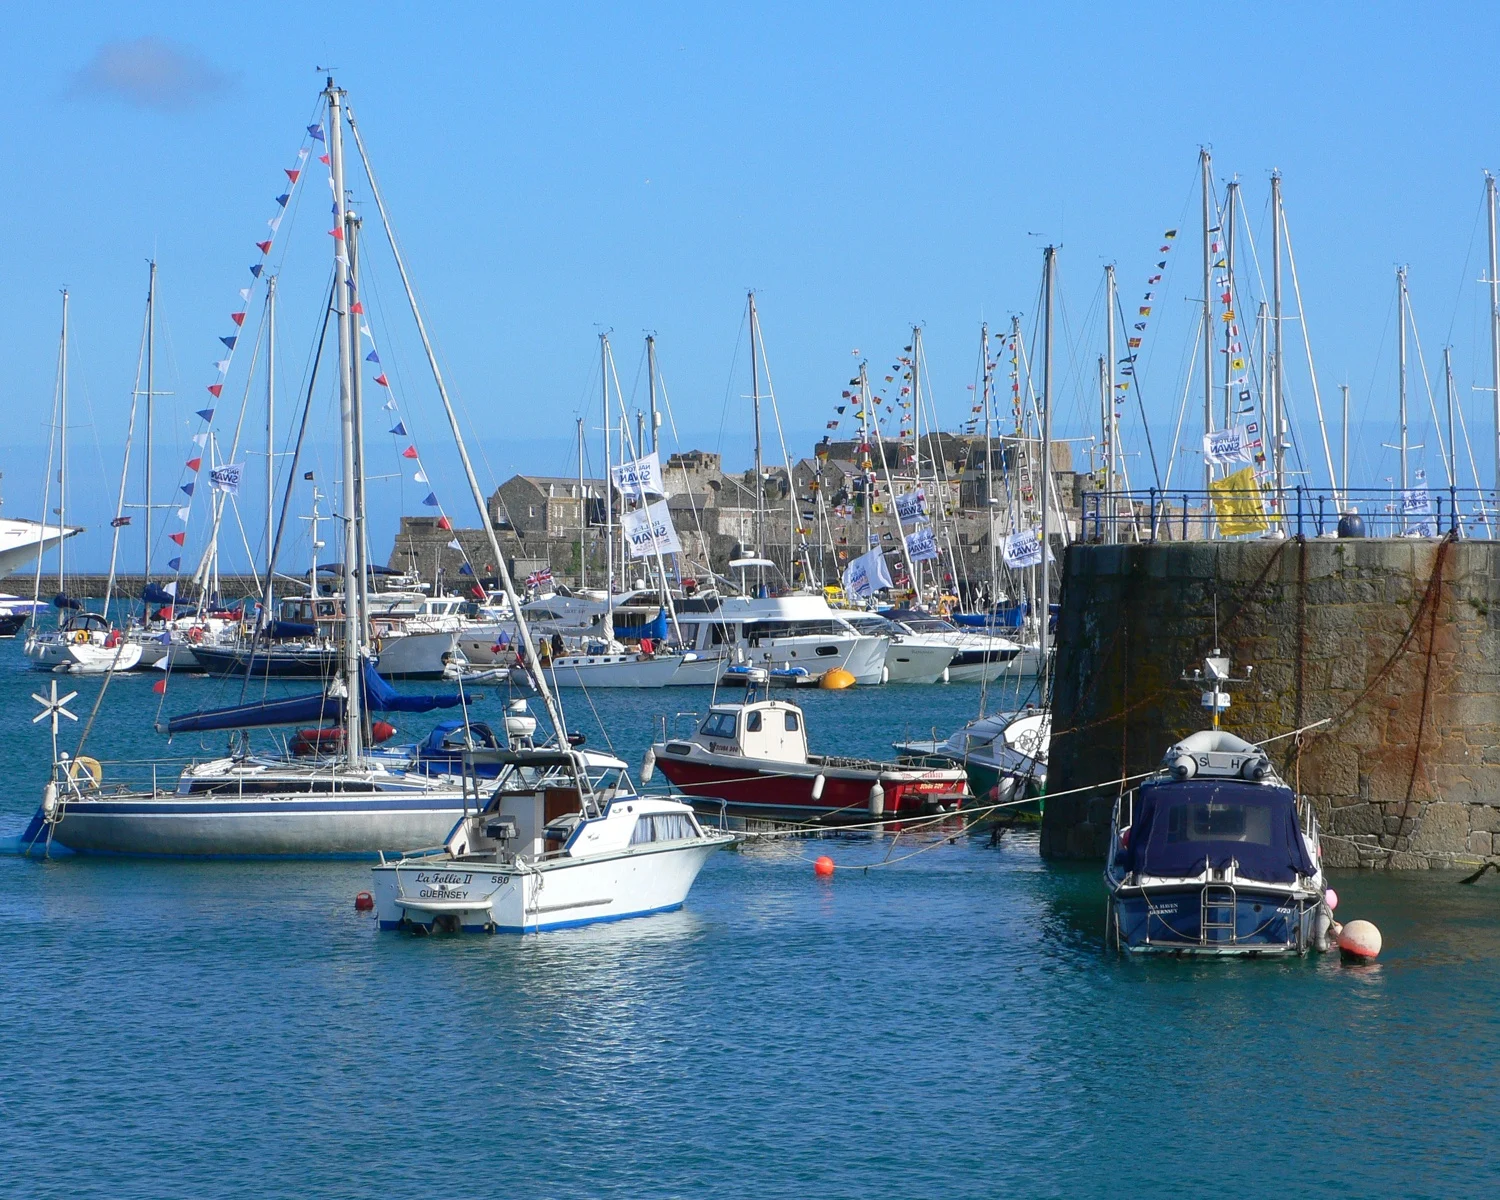 St Peter Port - Things to do in Guernsey Photo Heatheronhertravels.com